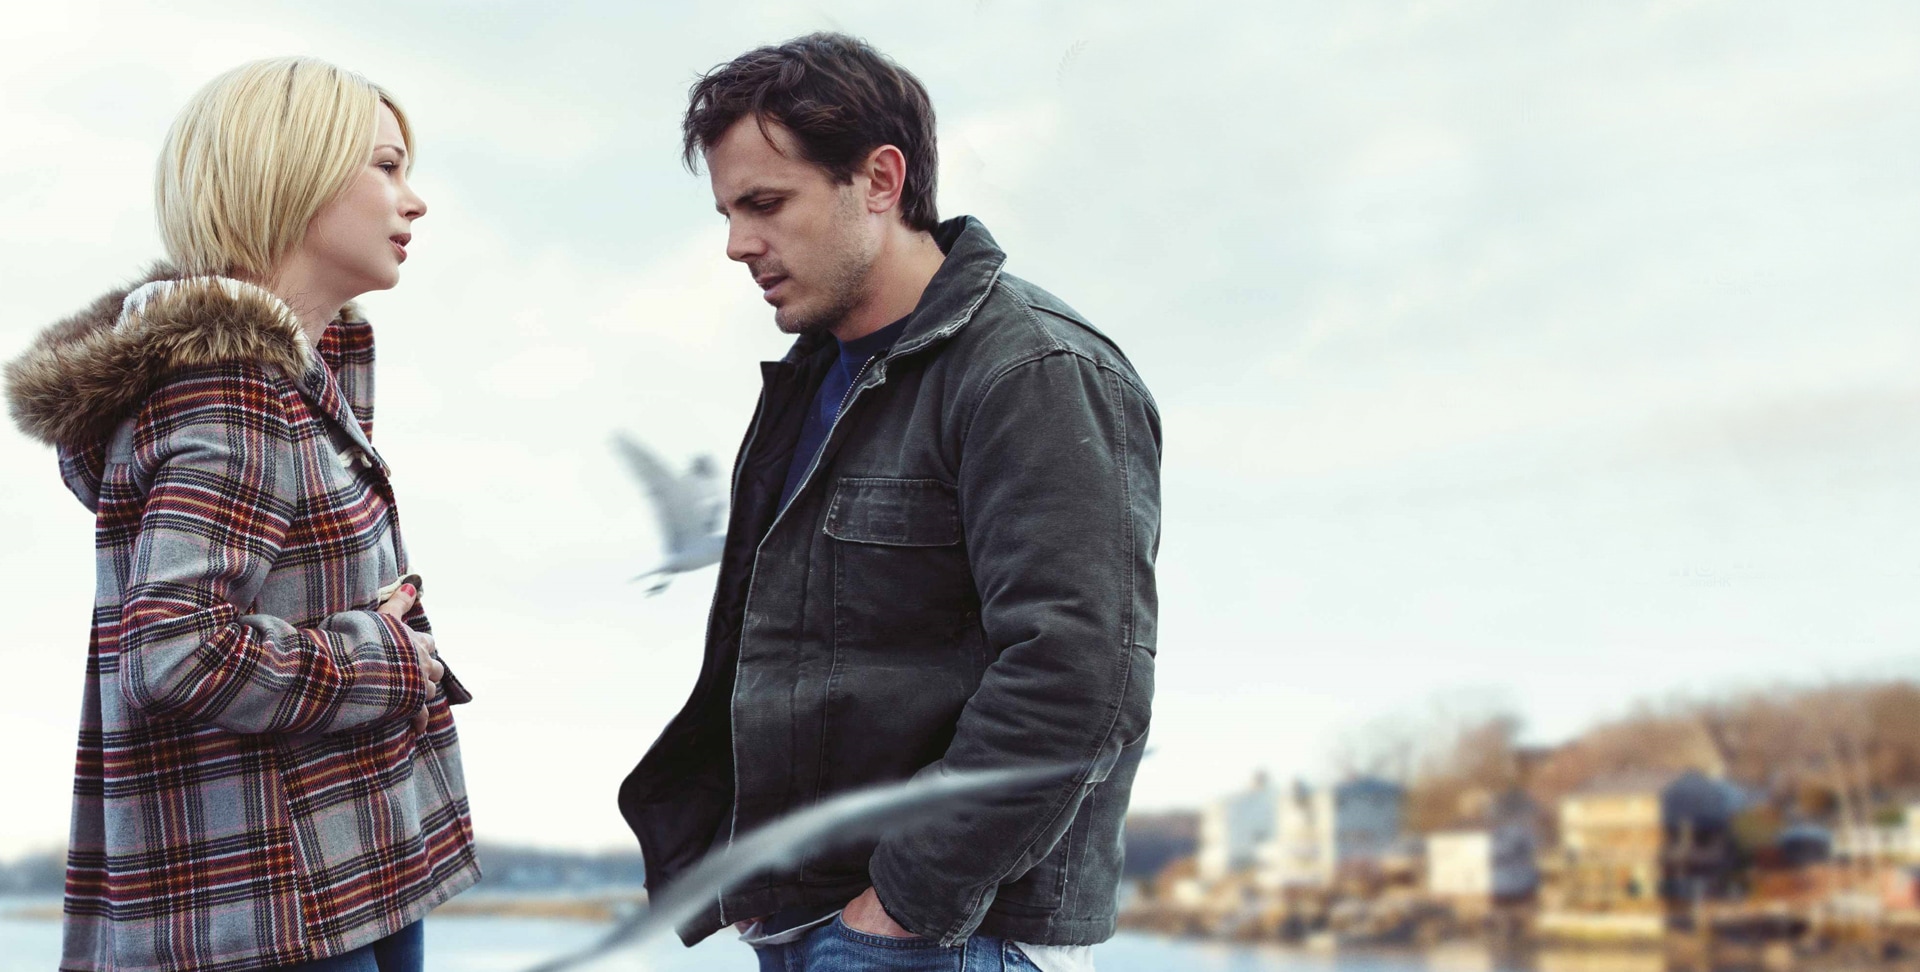 Movie of the week: buy “Manchester by the Sea”, with Michelle Williams and Casey Affleck, for R $ 9.90!